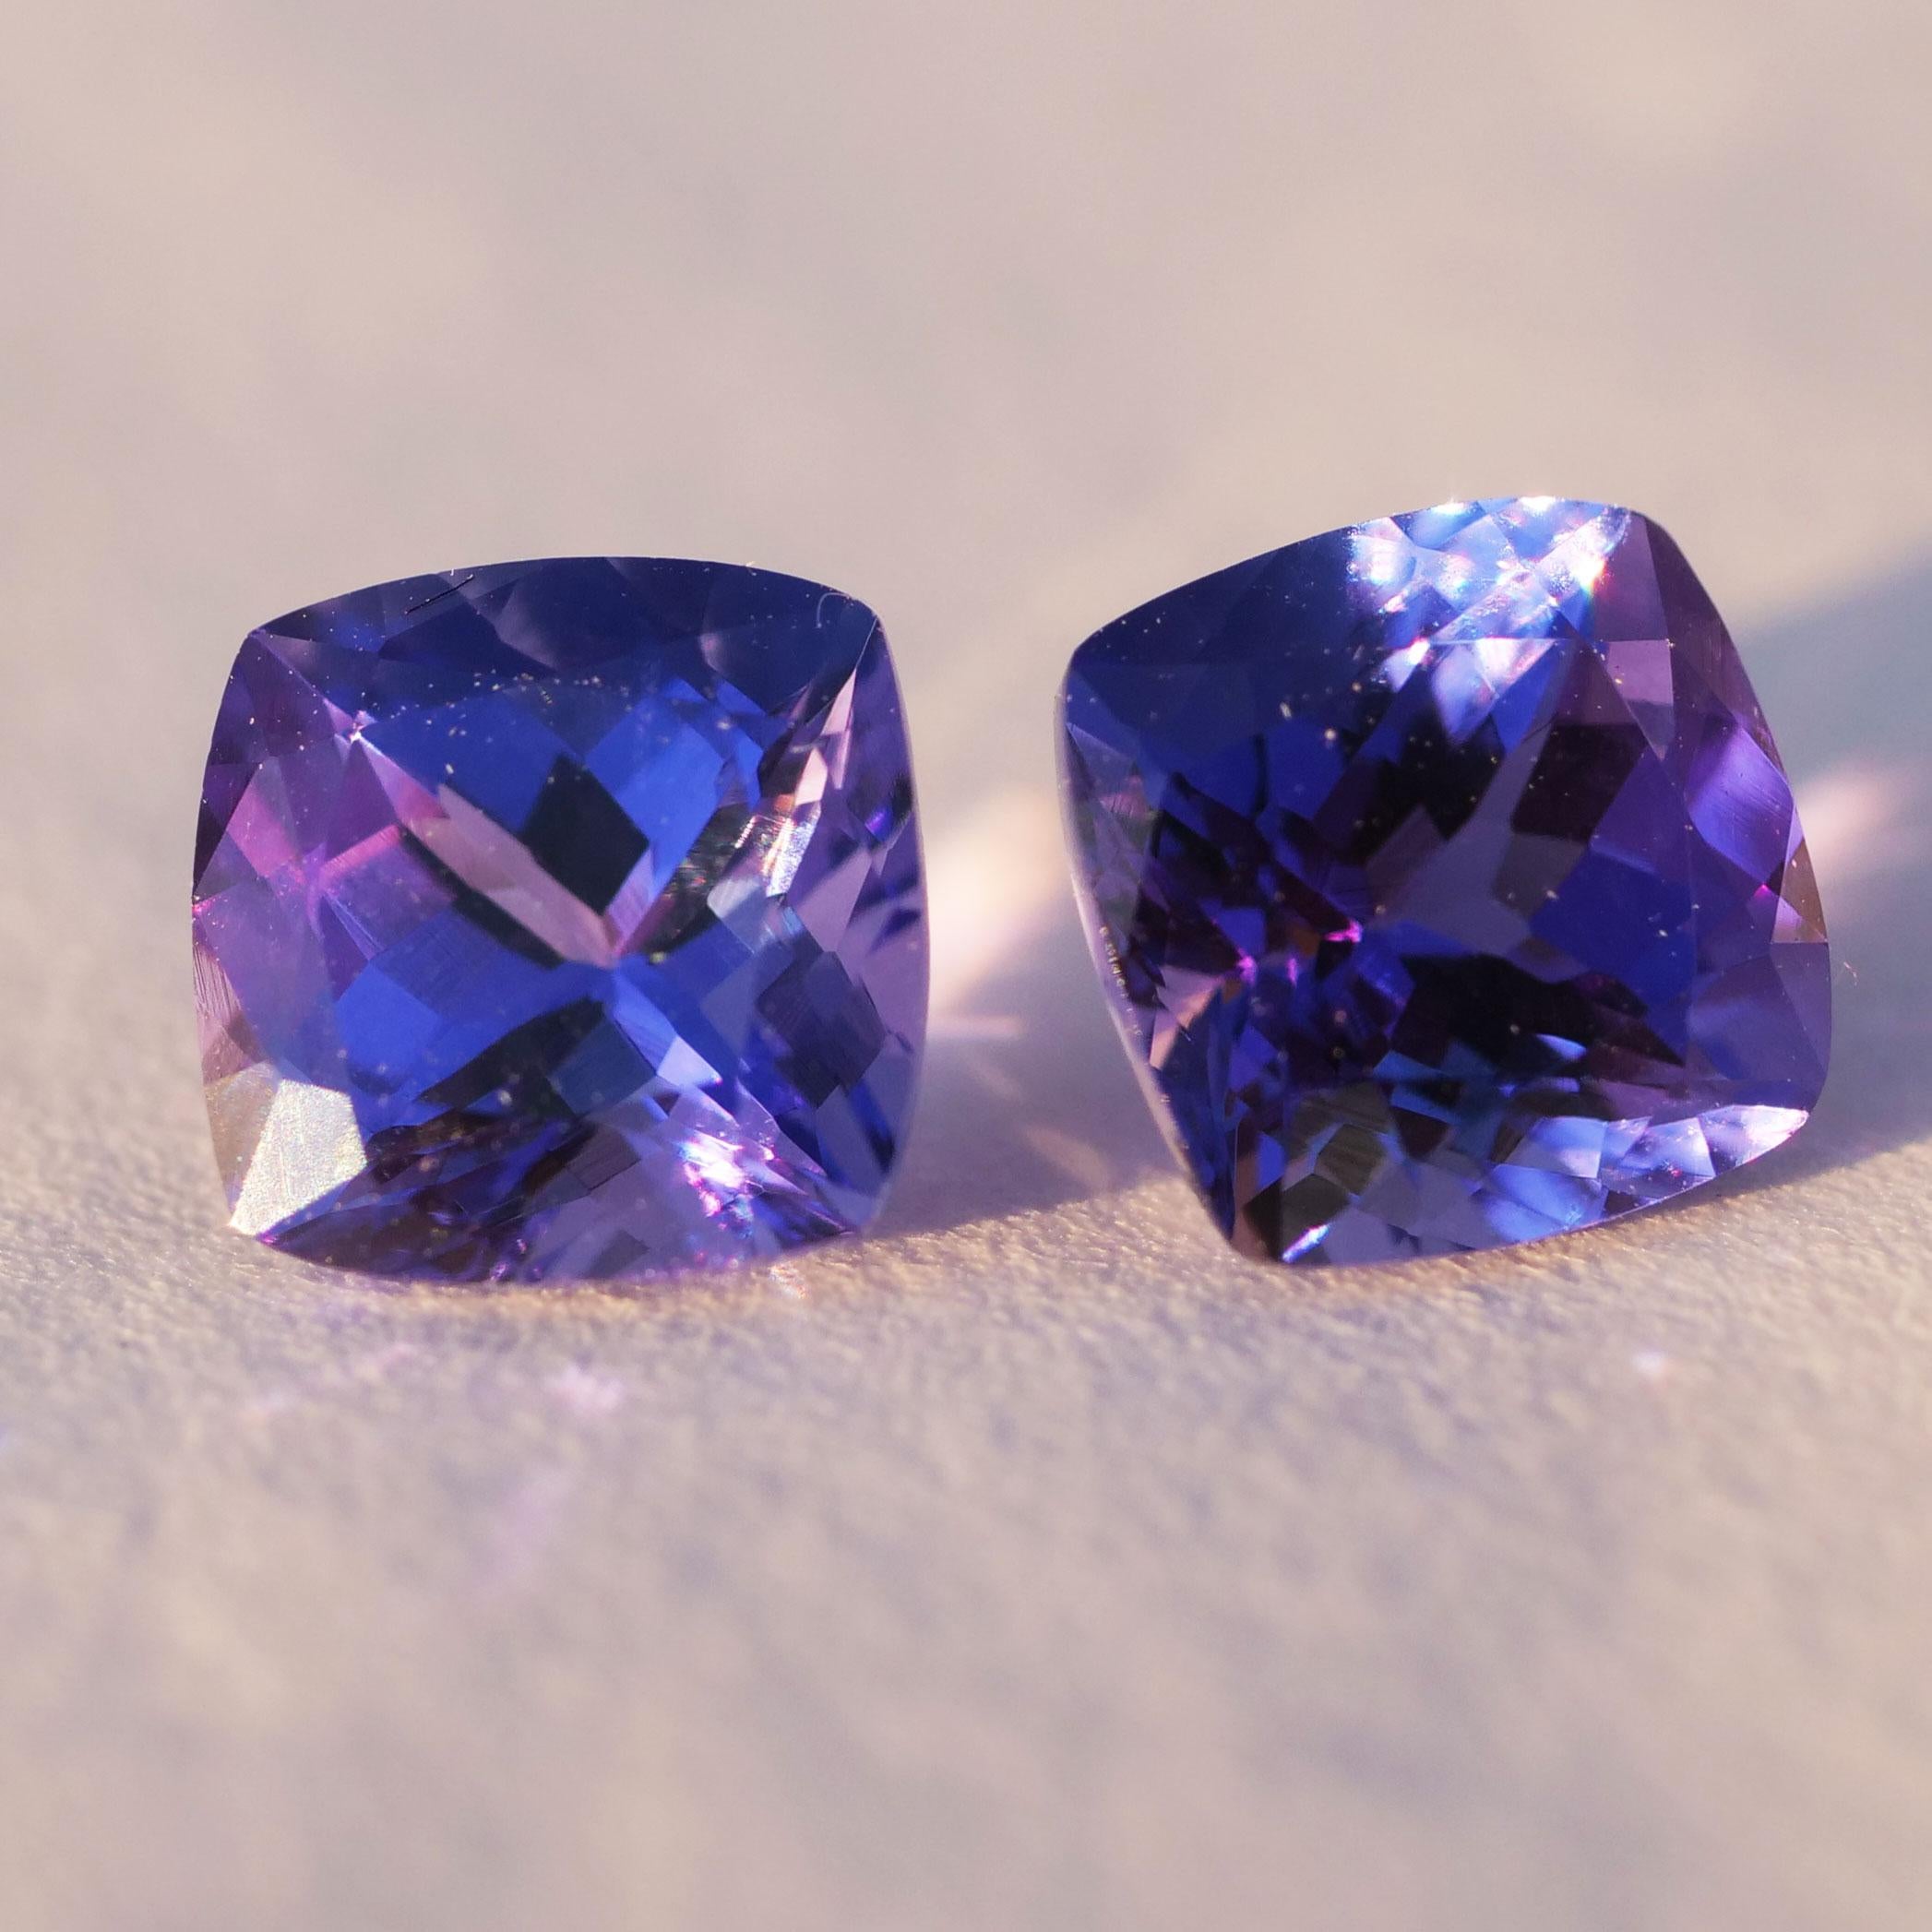 Create your own earrings, this pair of very fine tanzanites can be a amazing jewelry, 2 tanzanites with 6 x 6 mm, 4,9 mm deep, AAA+, square cut, color blue with a flush violet, eye clean, brilliance very good, cut very good, total 2.91 ct